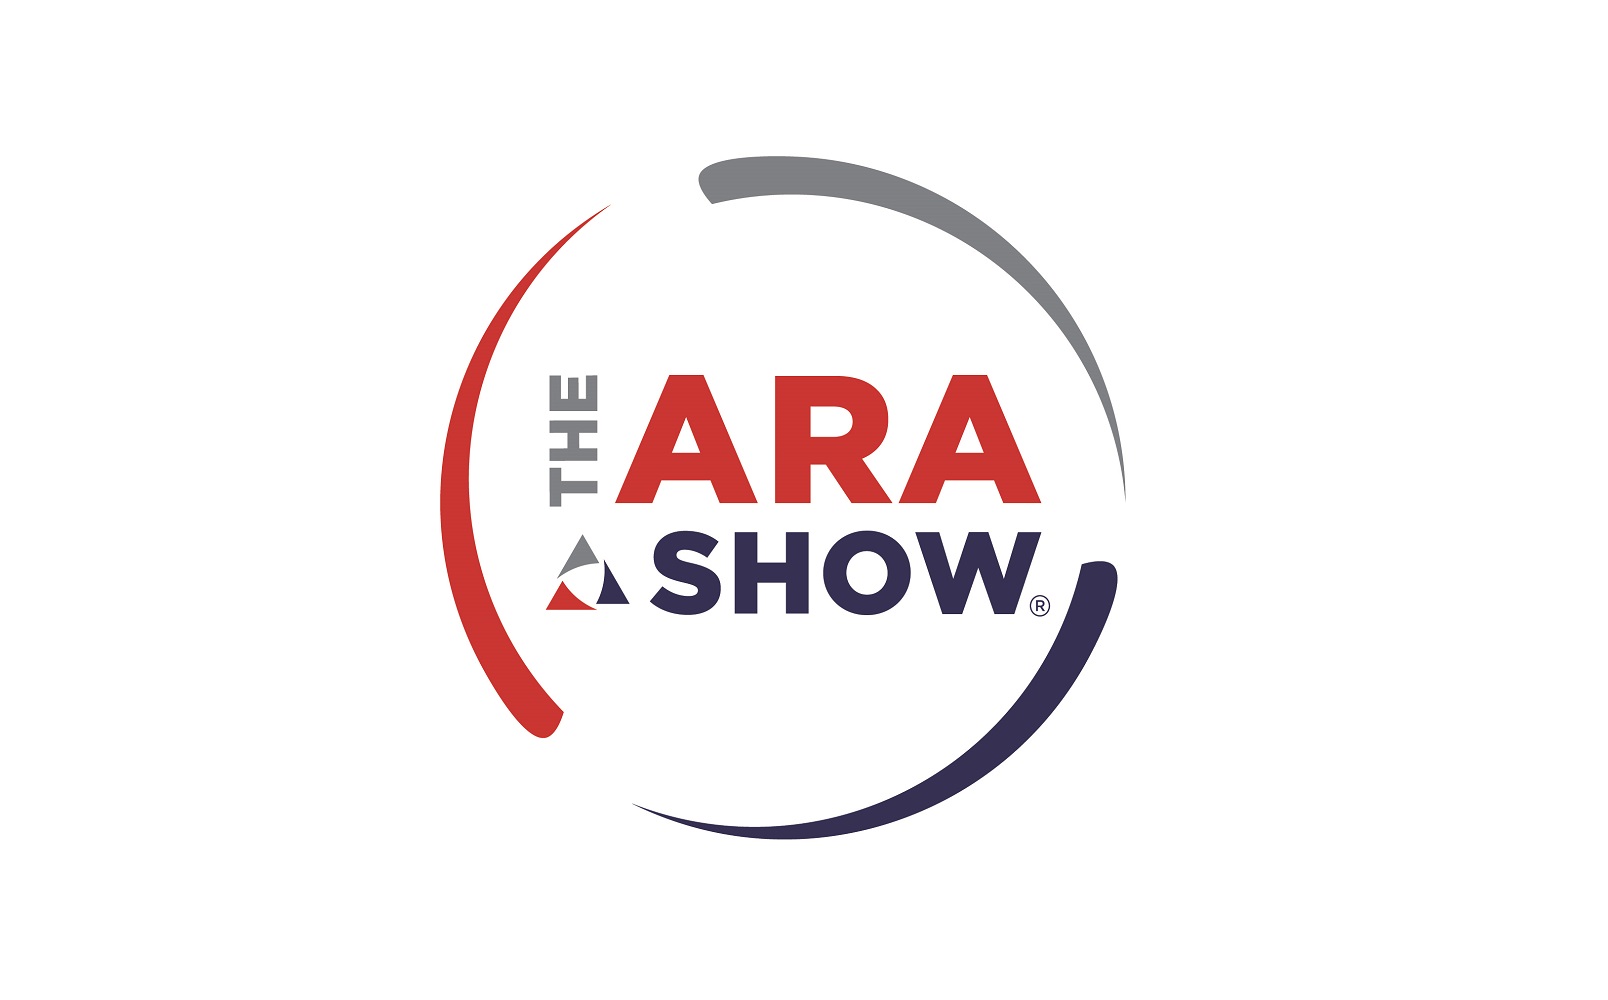 High Attendance at The ARA Show 2023 Reflects Positive State of Rental Industry